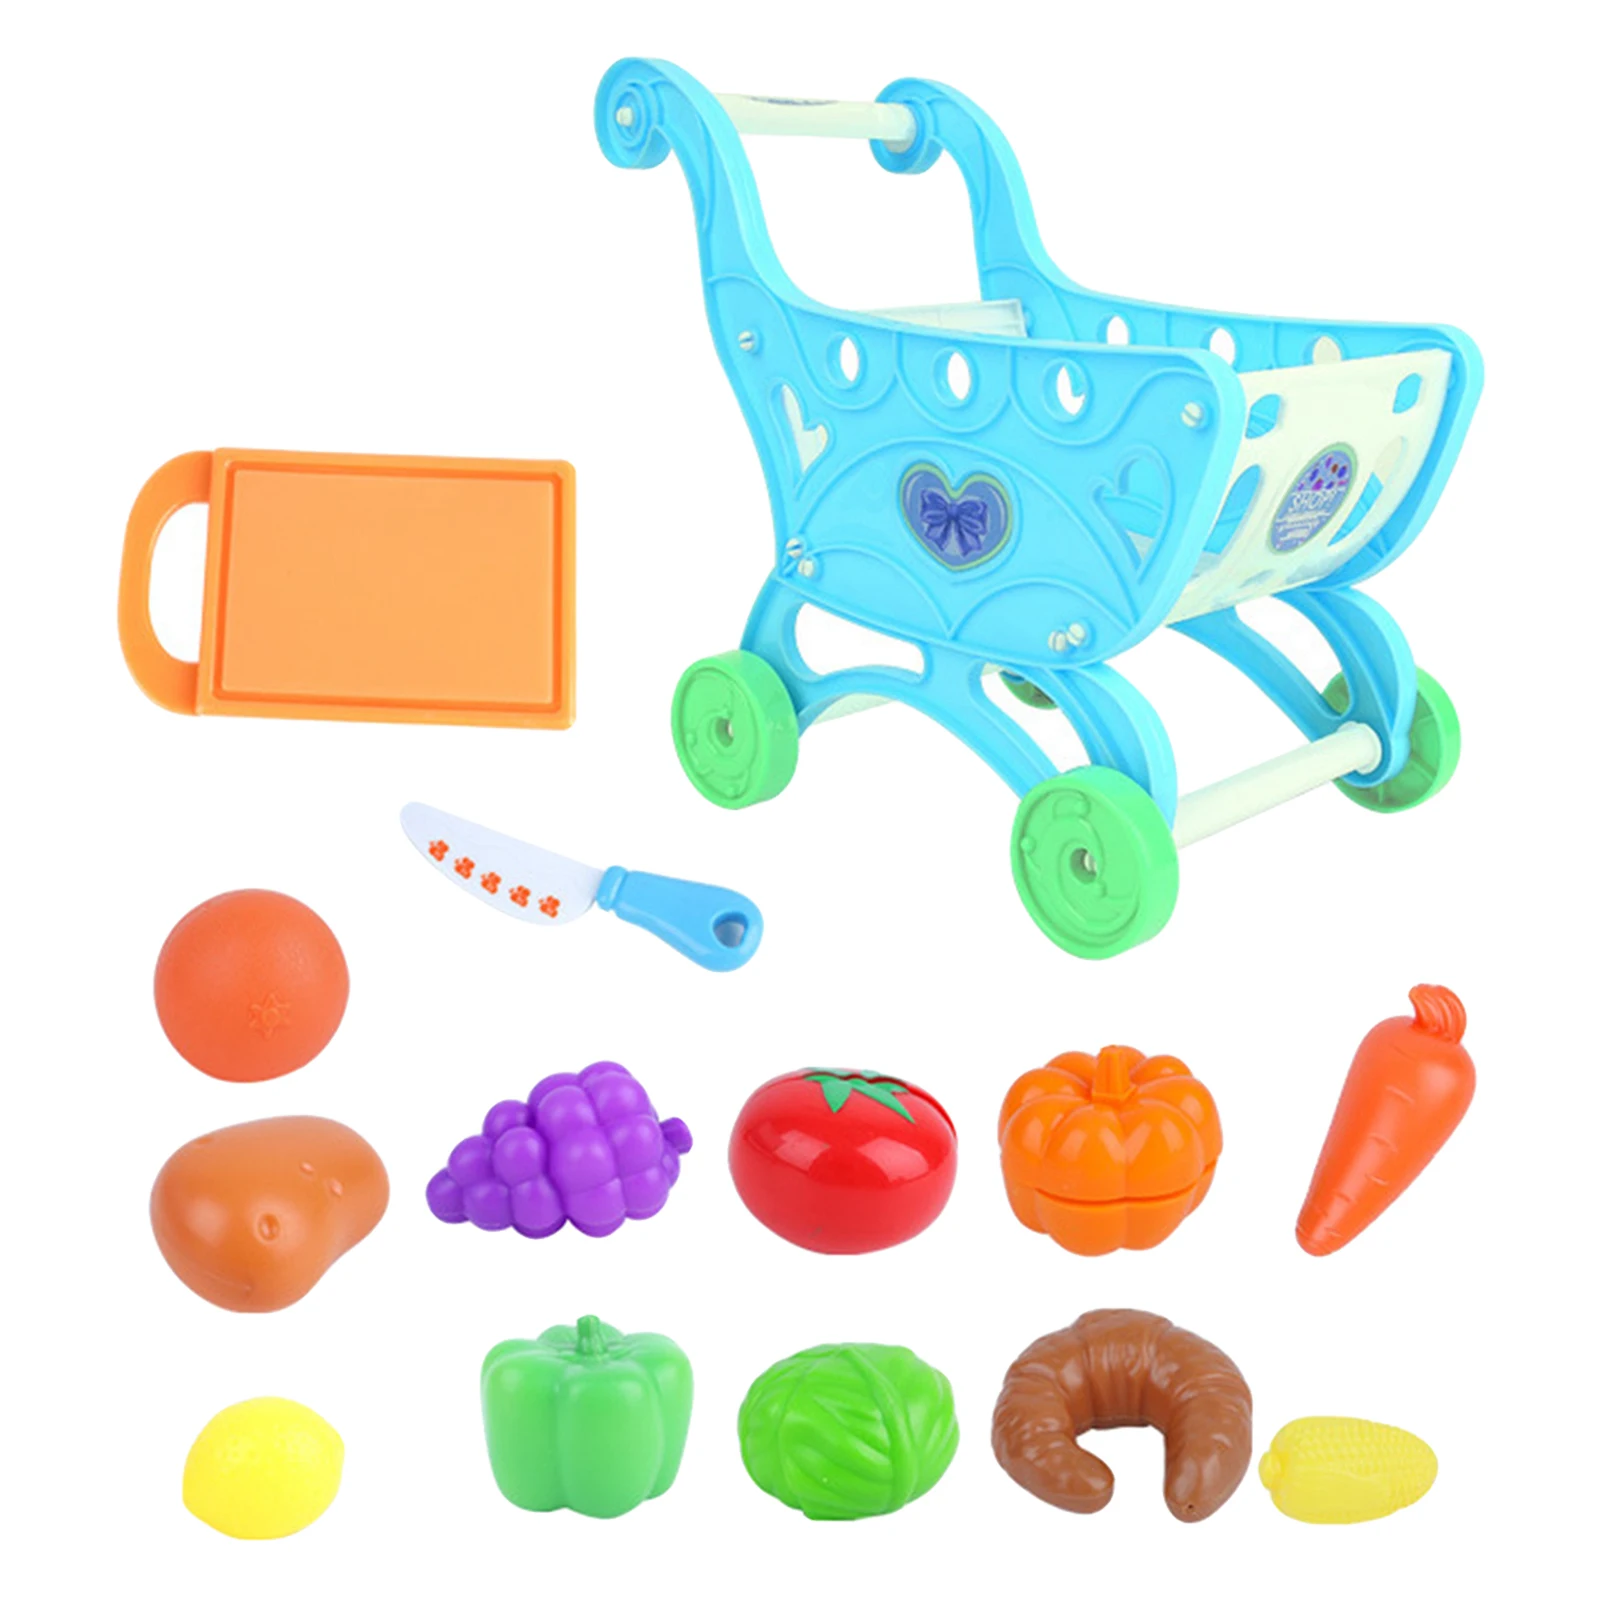 14Pcs/Set Shopping Trolley Cart Supermarket Trolley Toys Creative Imaginative Play Pretend Play Toy